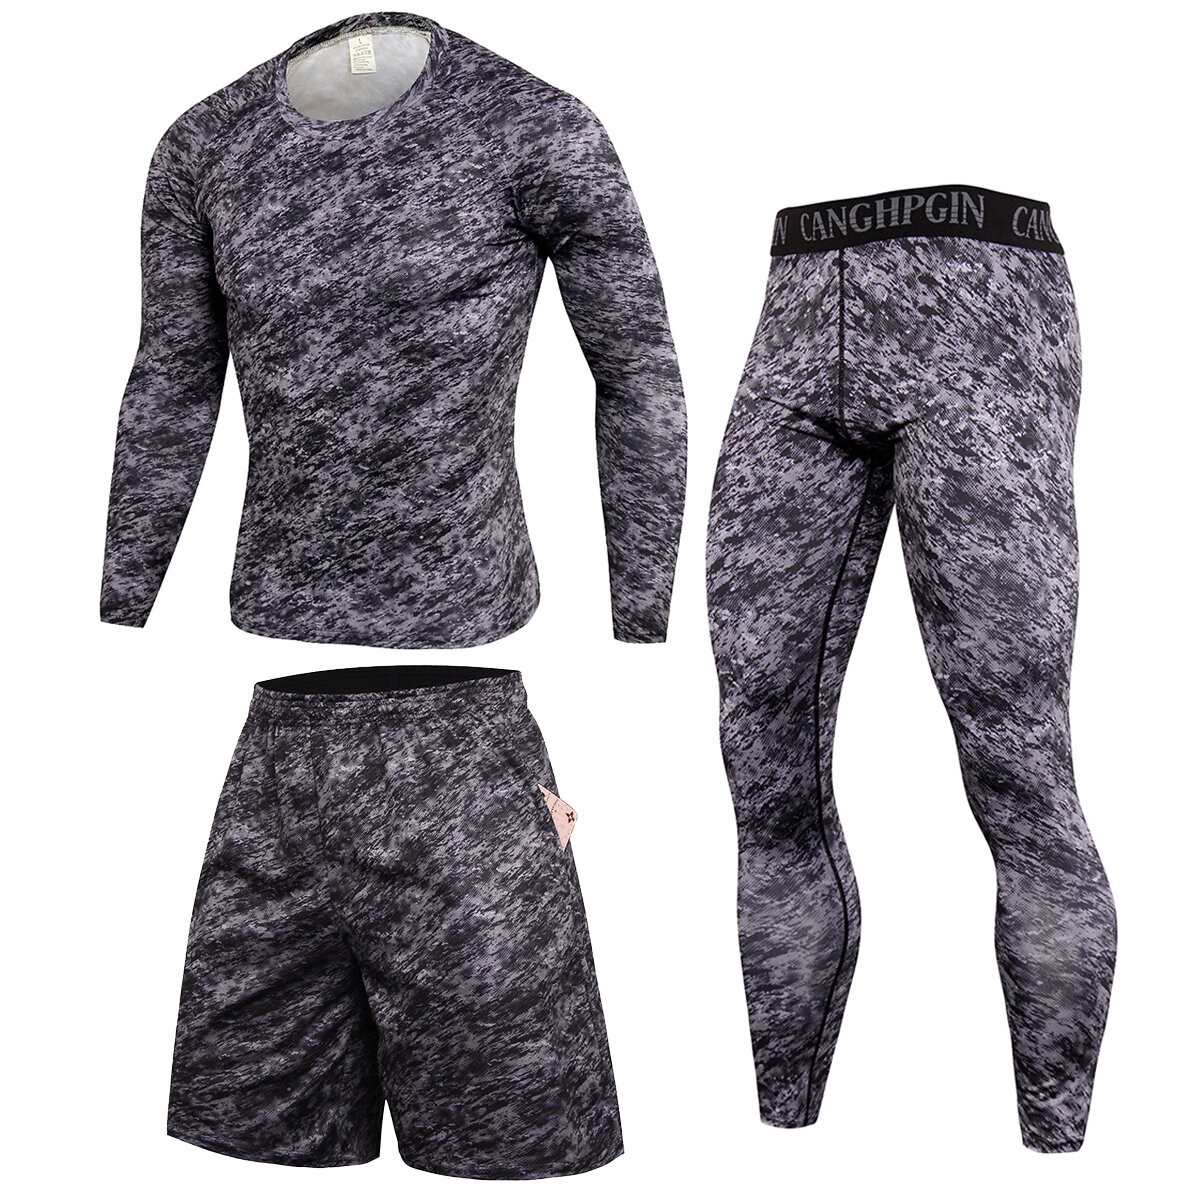 Niksa Pack Gym Clothes For Men,Running Clothes Sports Wear, 48% OFF